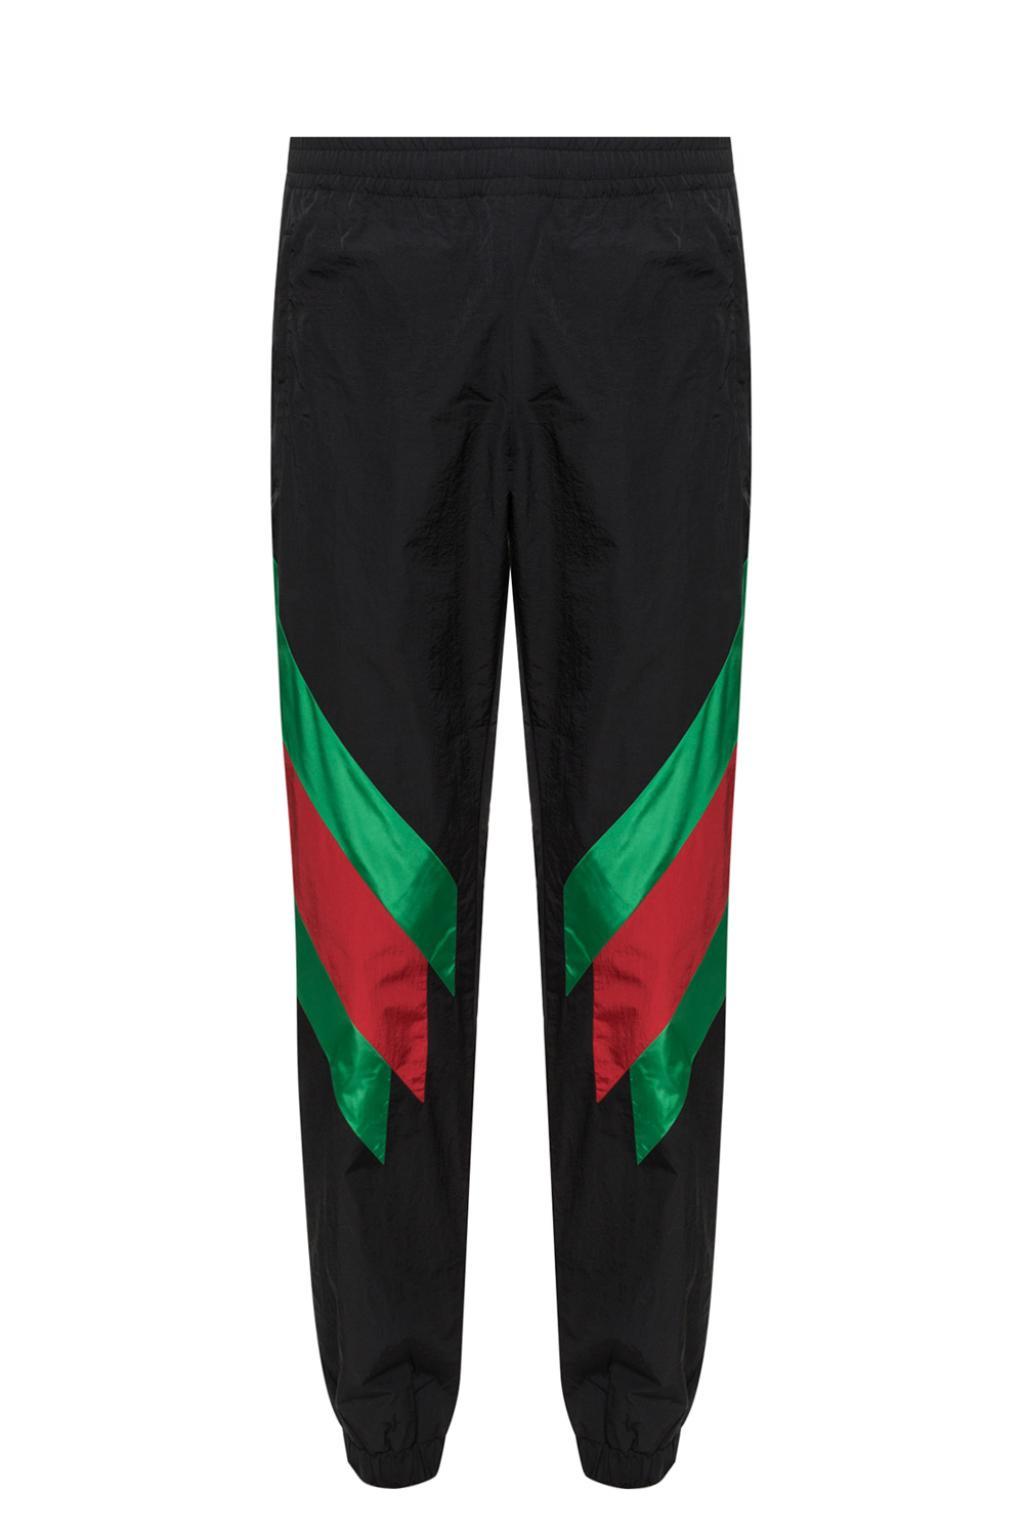 Gucci Synthetic Web Intarsia Nylon Track Pants In Black for Men - Lyst